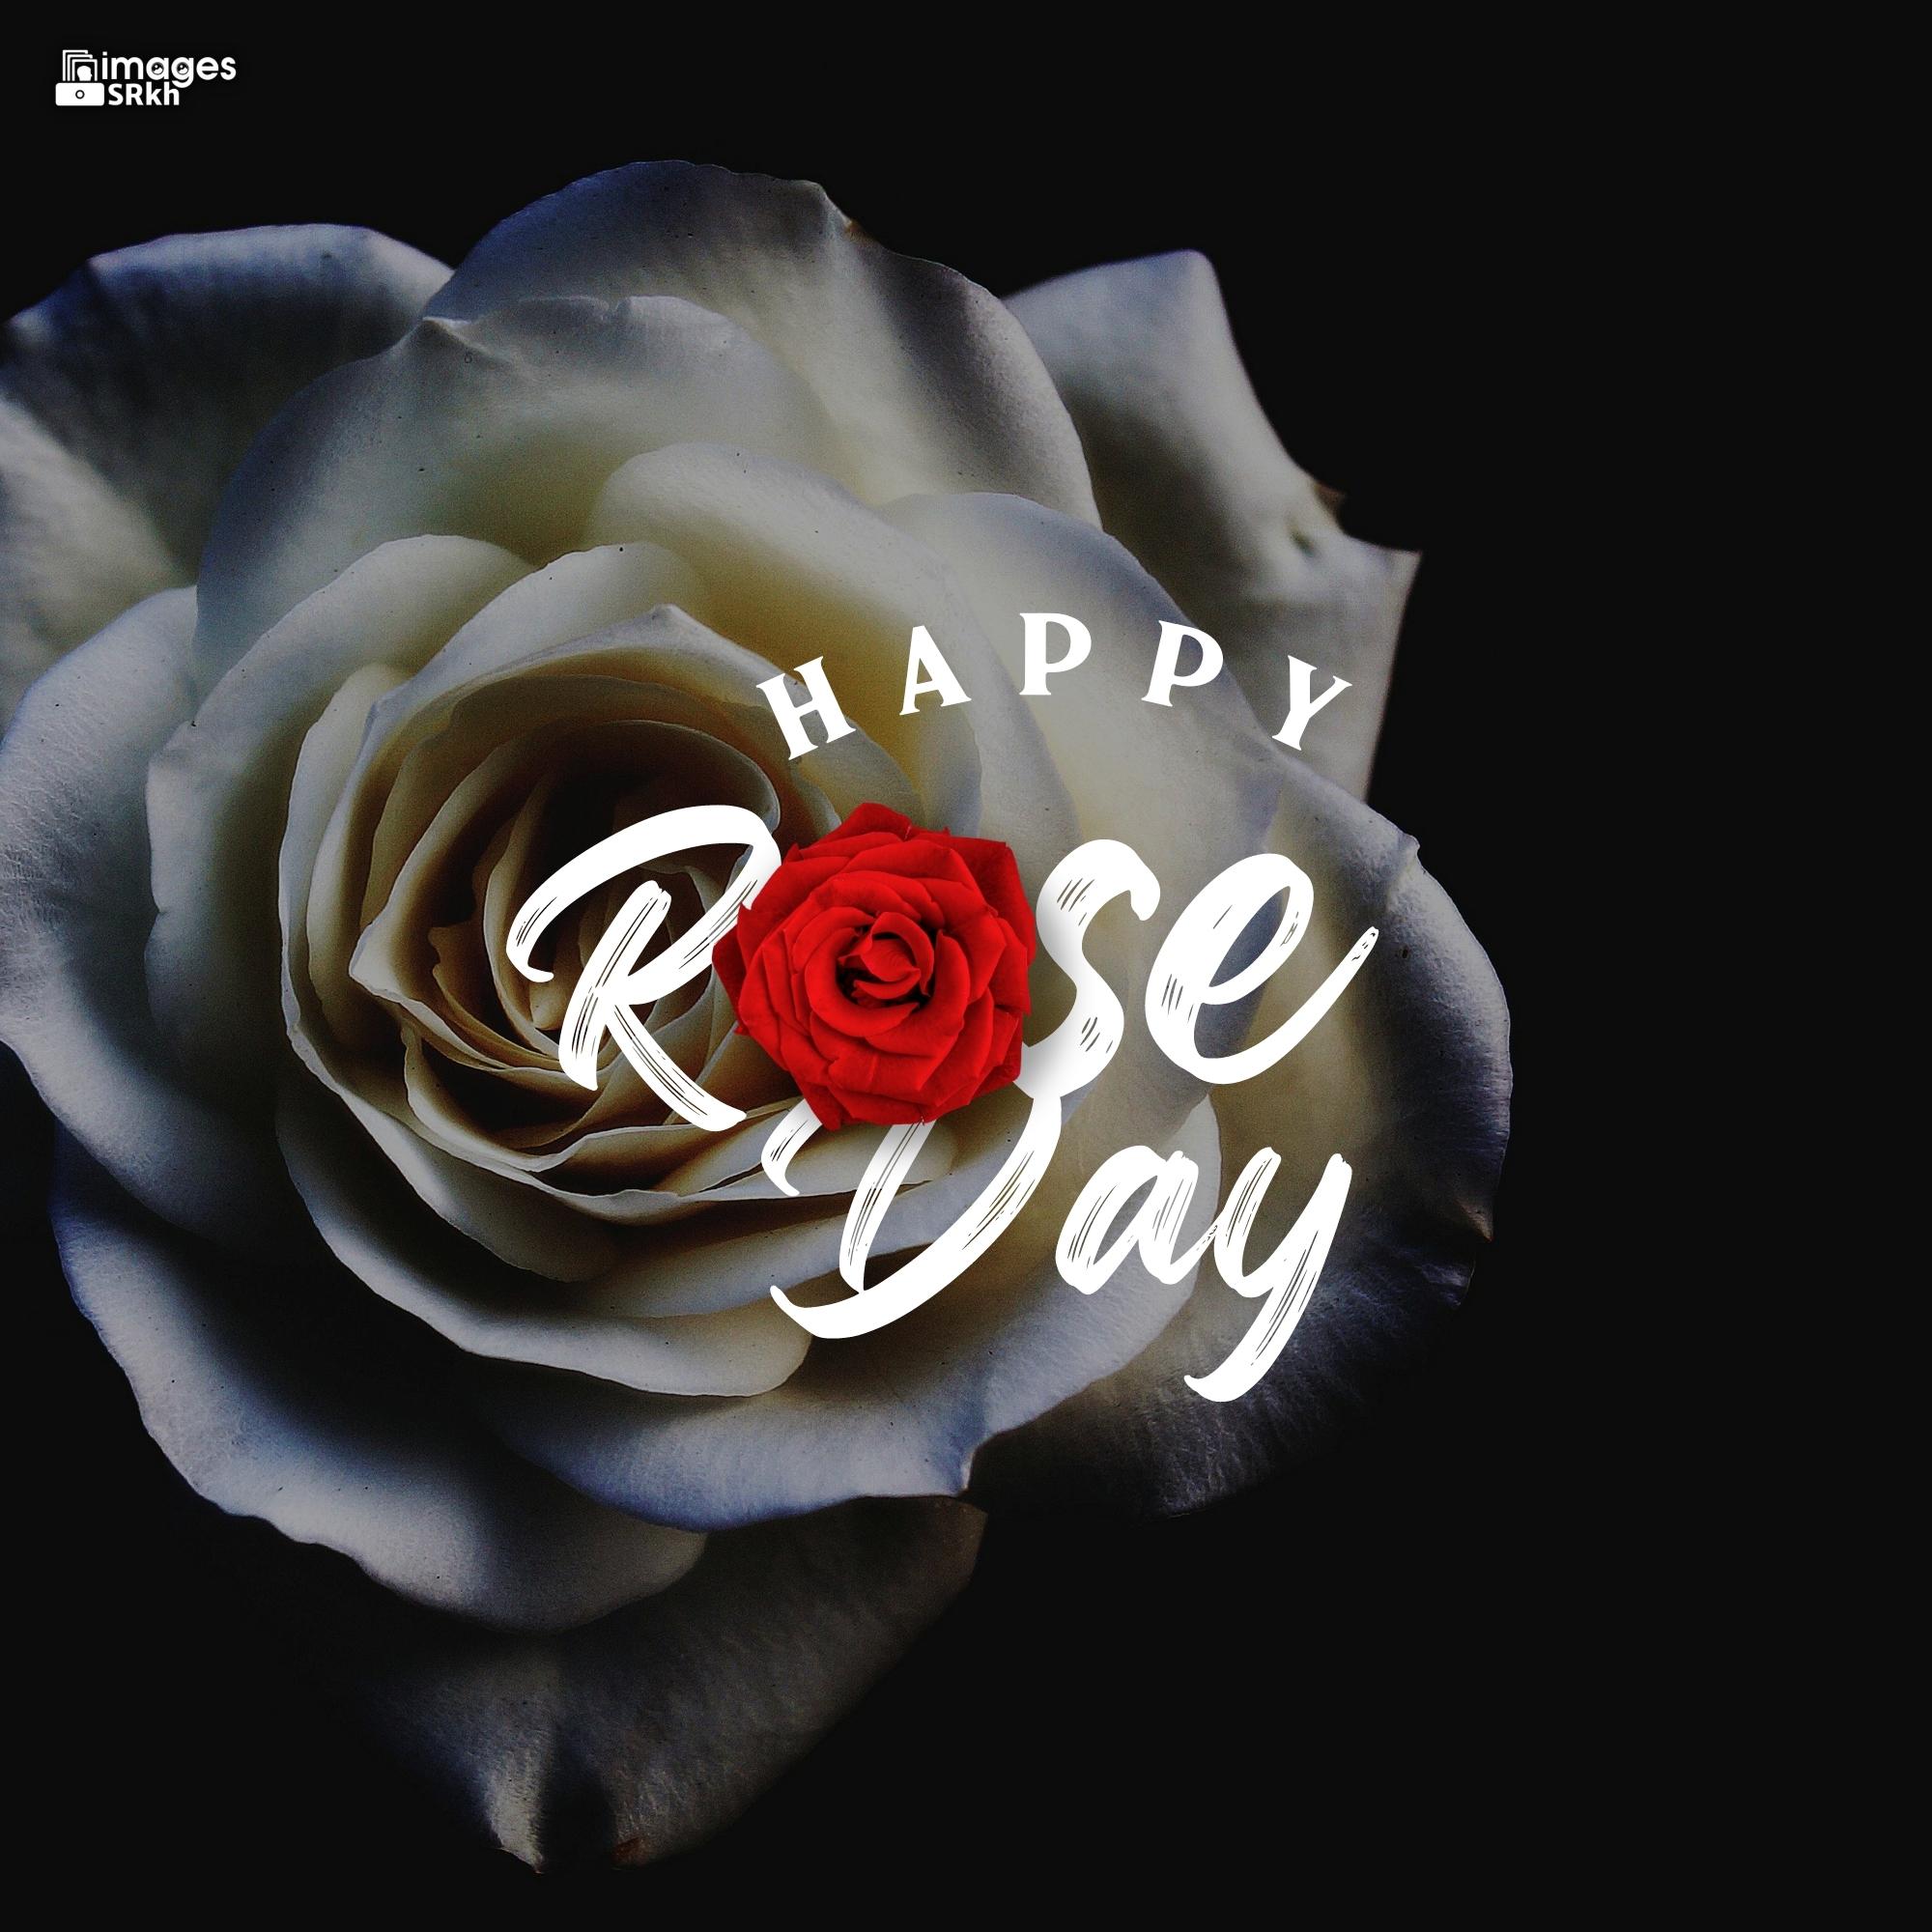 Happy Rose Day Image Hd Download (9)